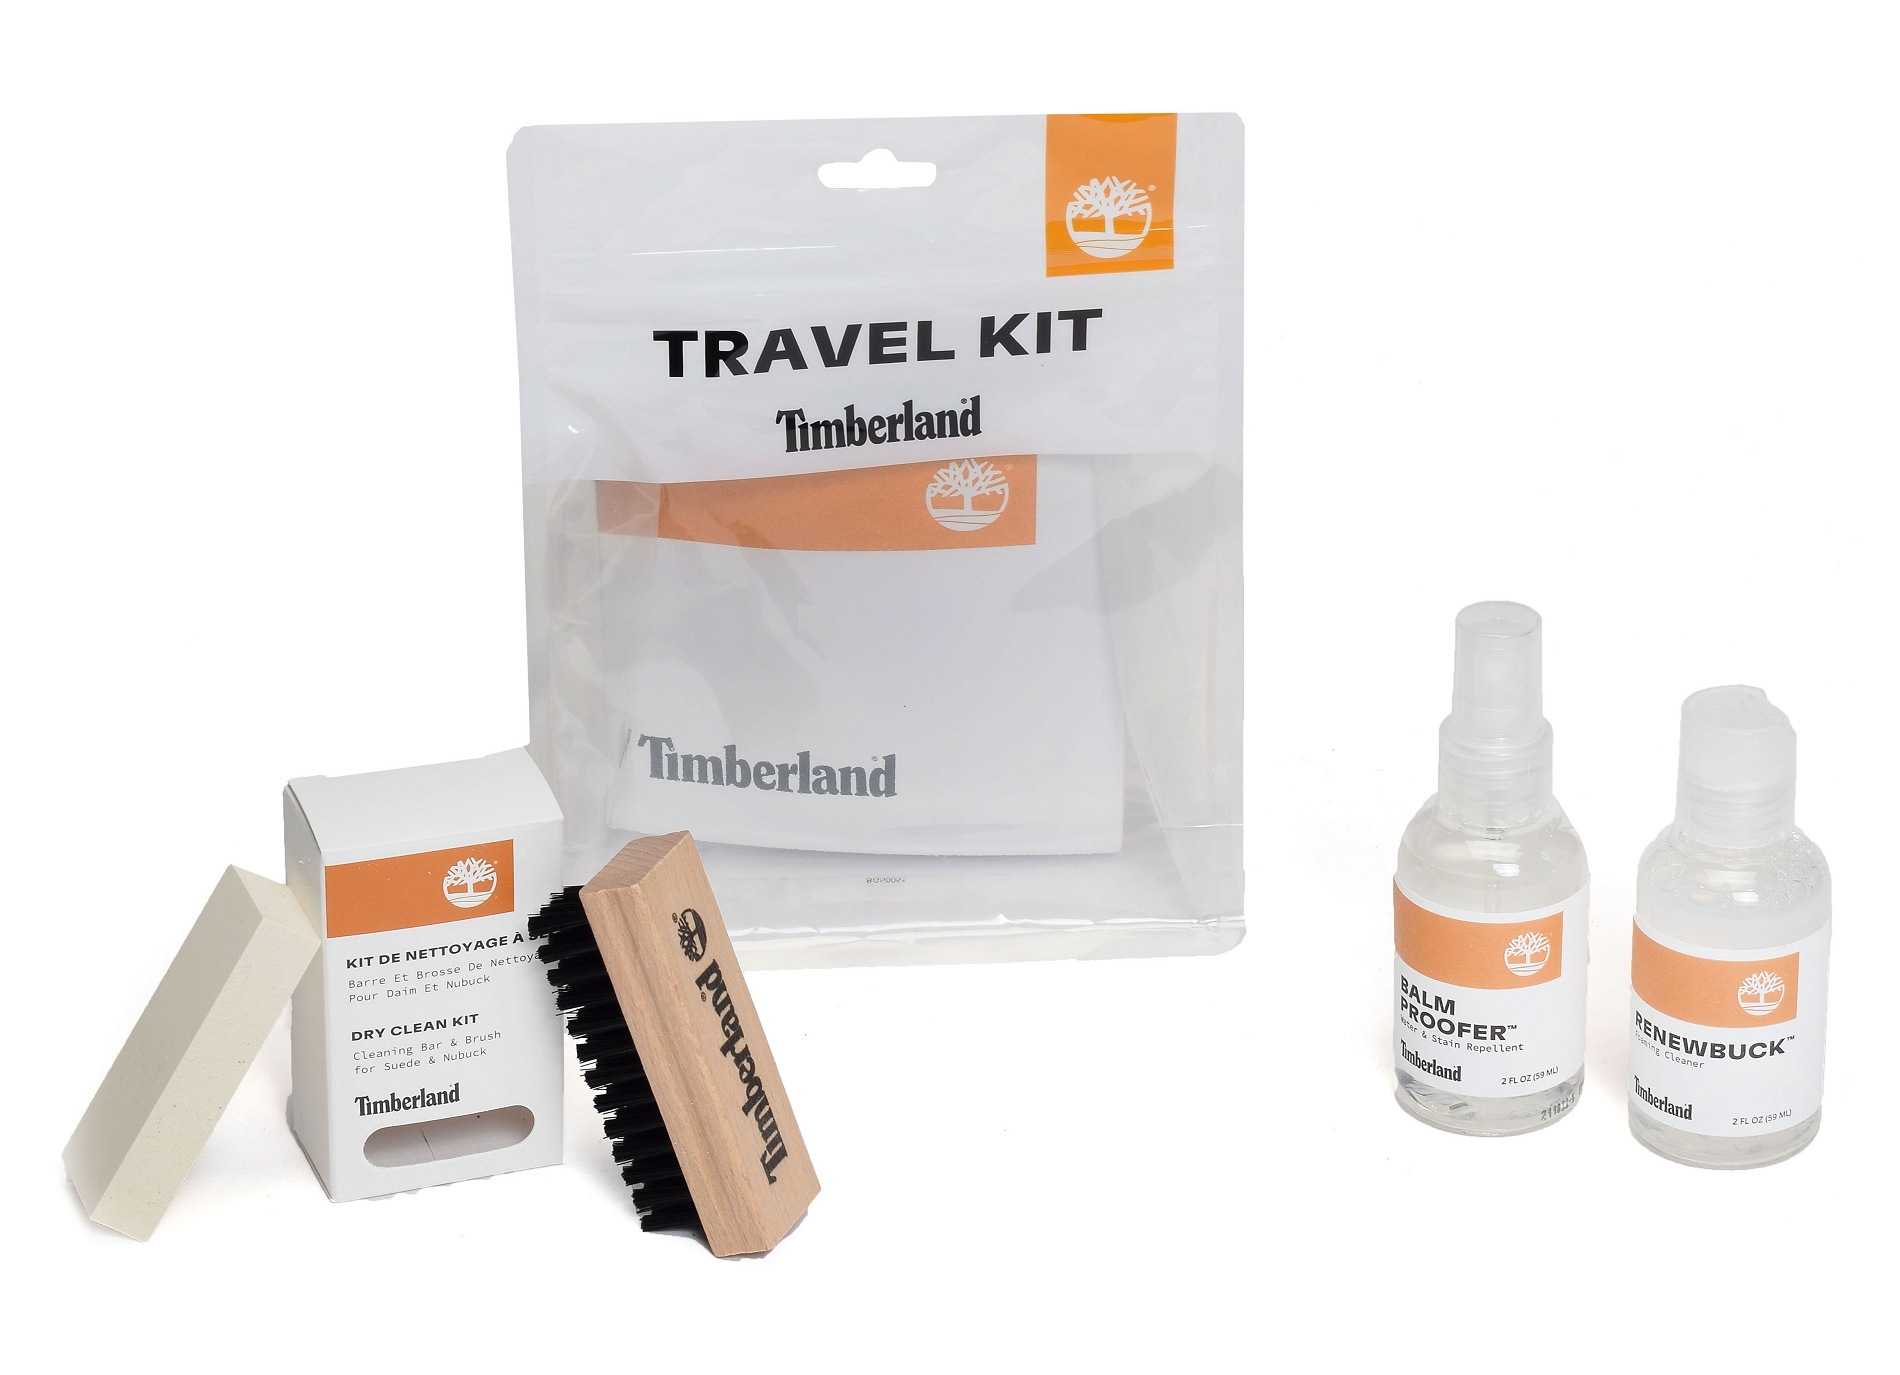 entretien Timberland Dry cleaning kit timberland